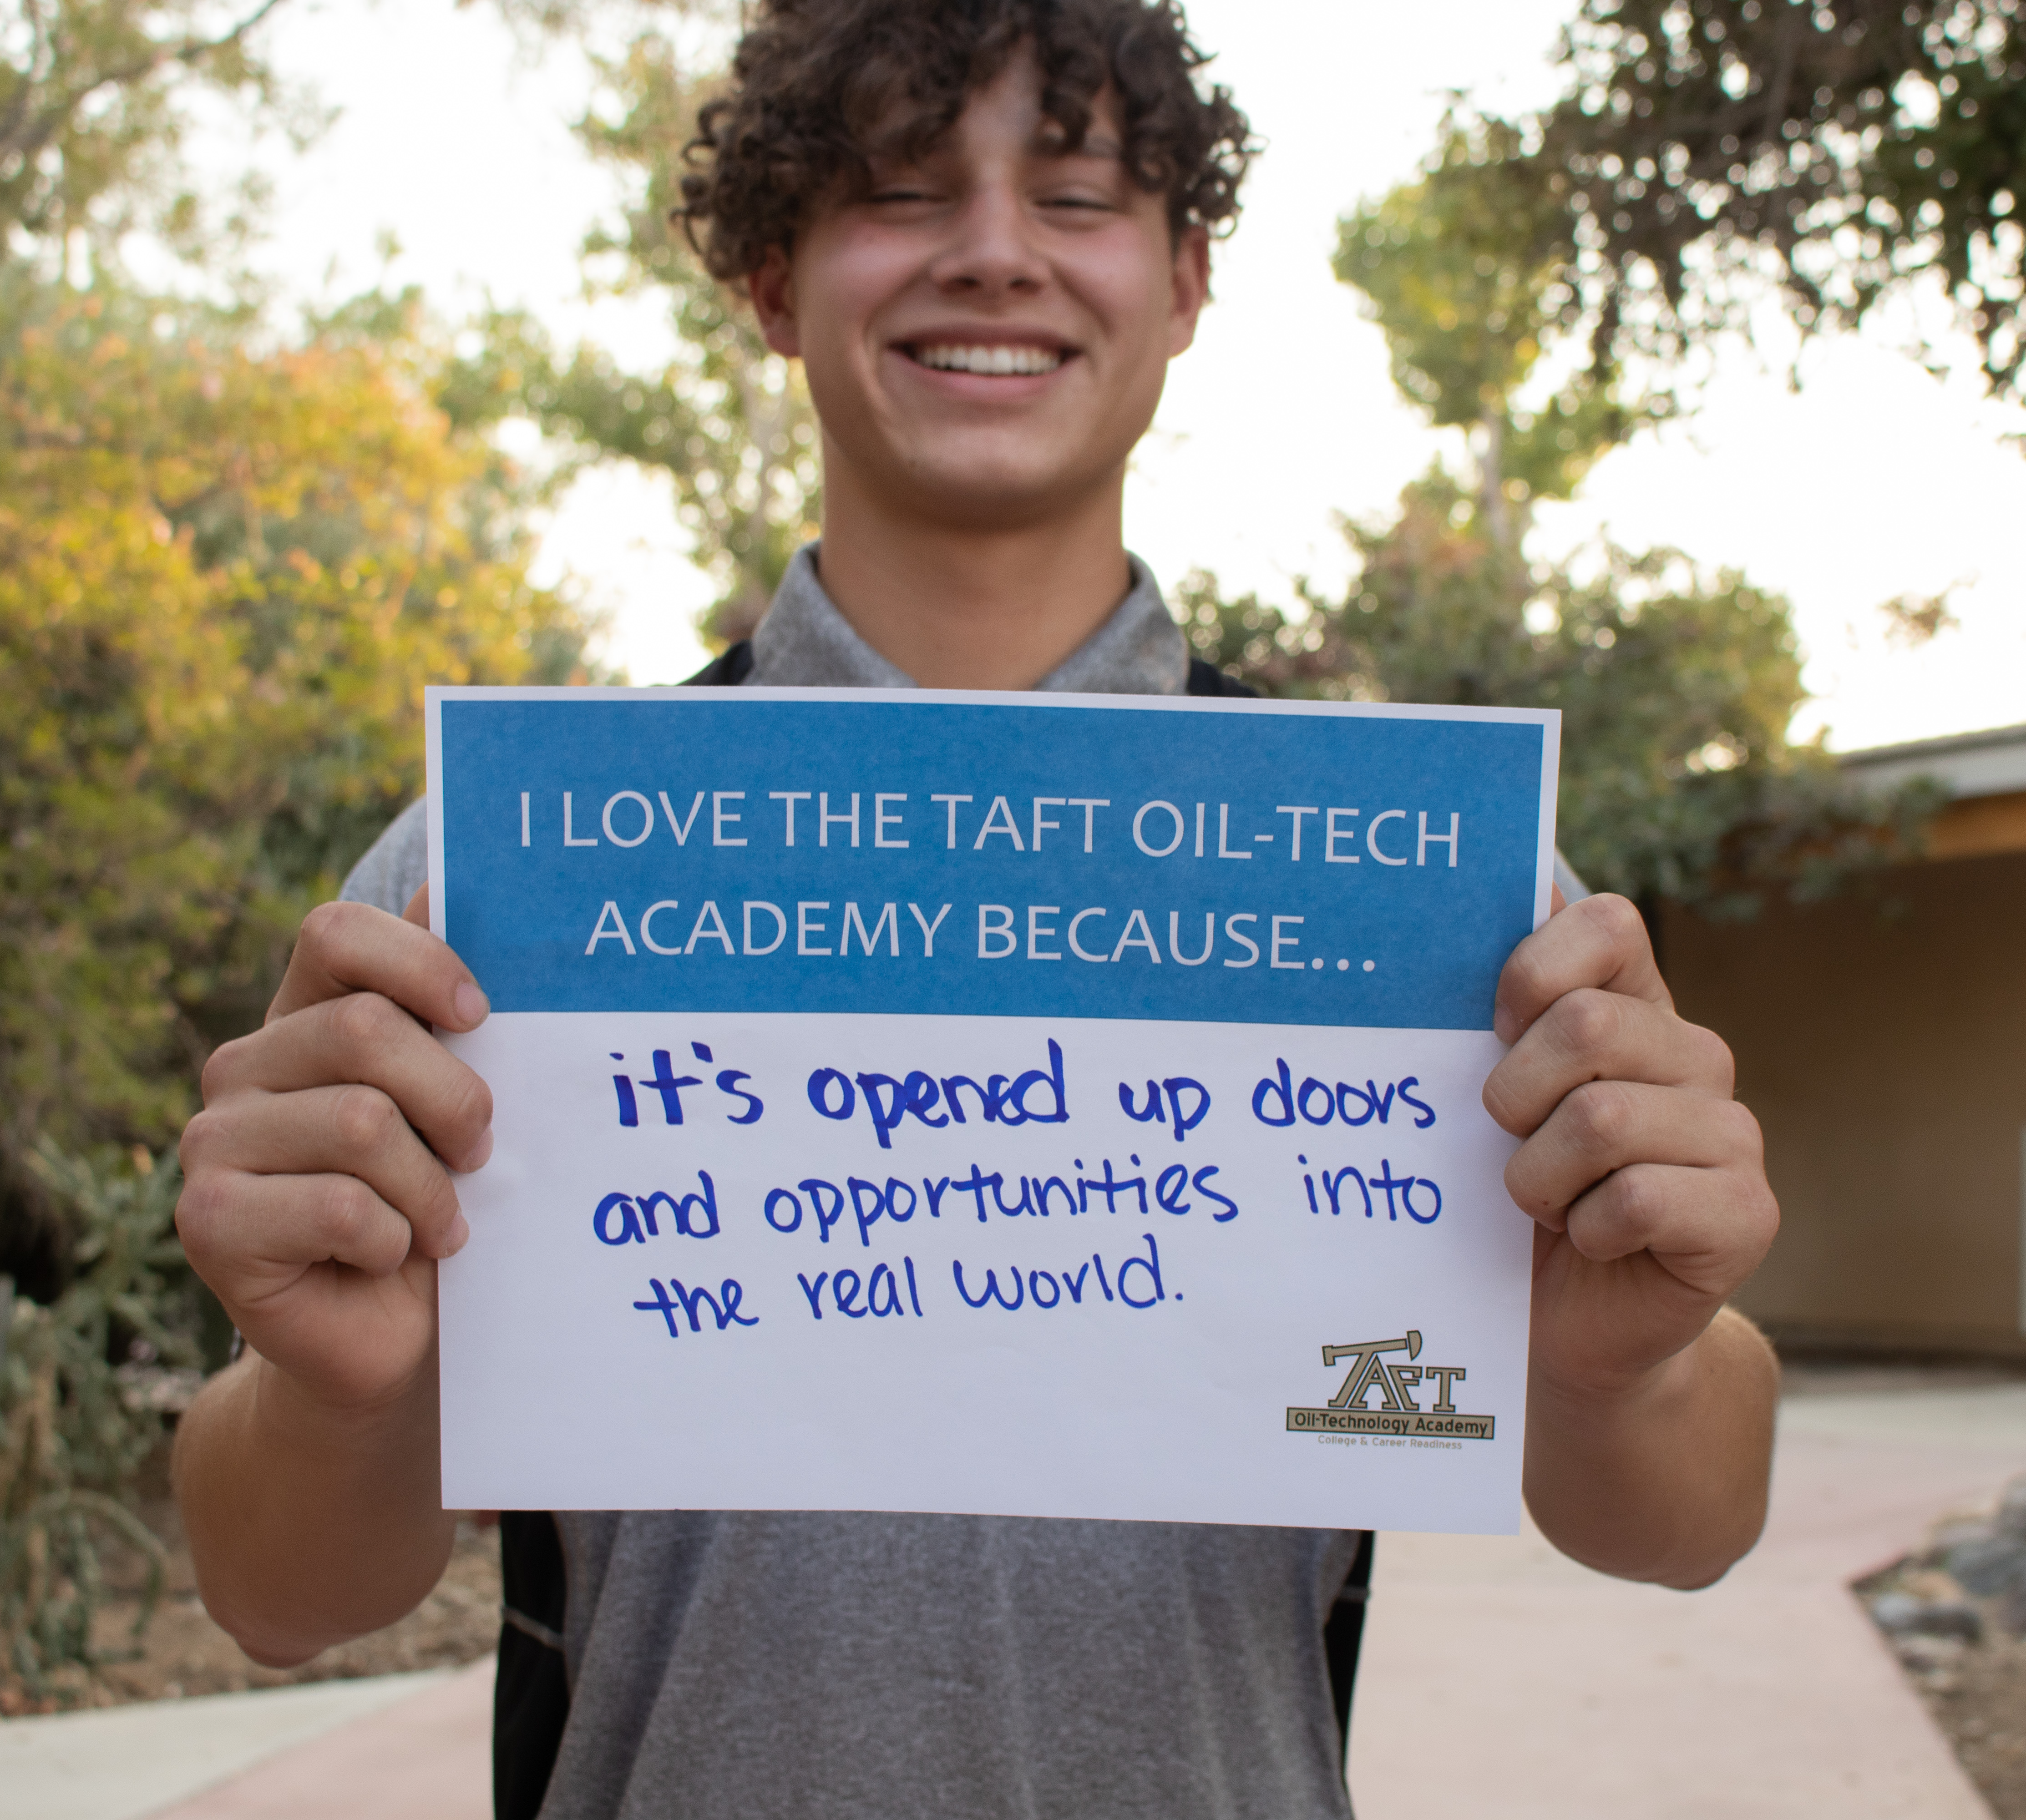 Student Drake - "I love Taft Oil-Tech Academy because..."it's opened up doors and opportunities into the real world"